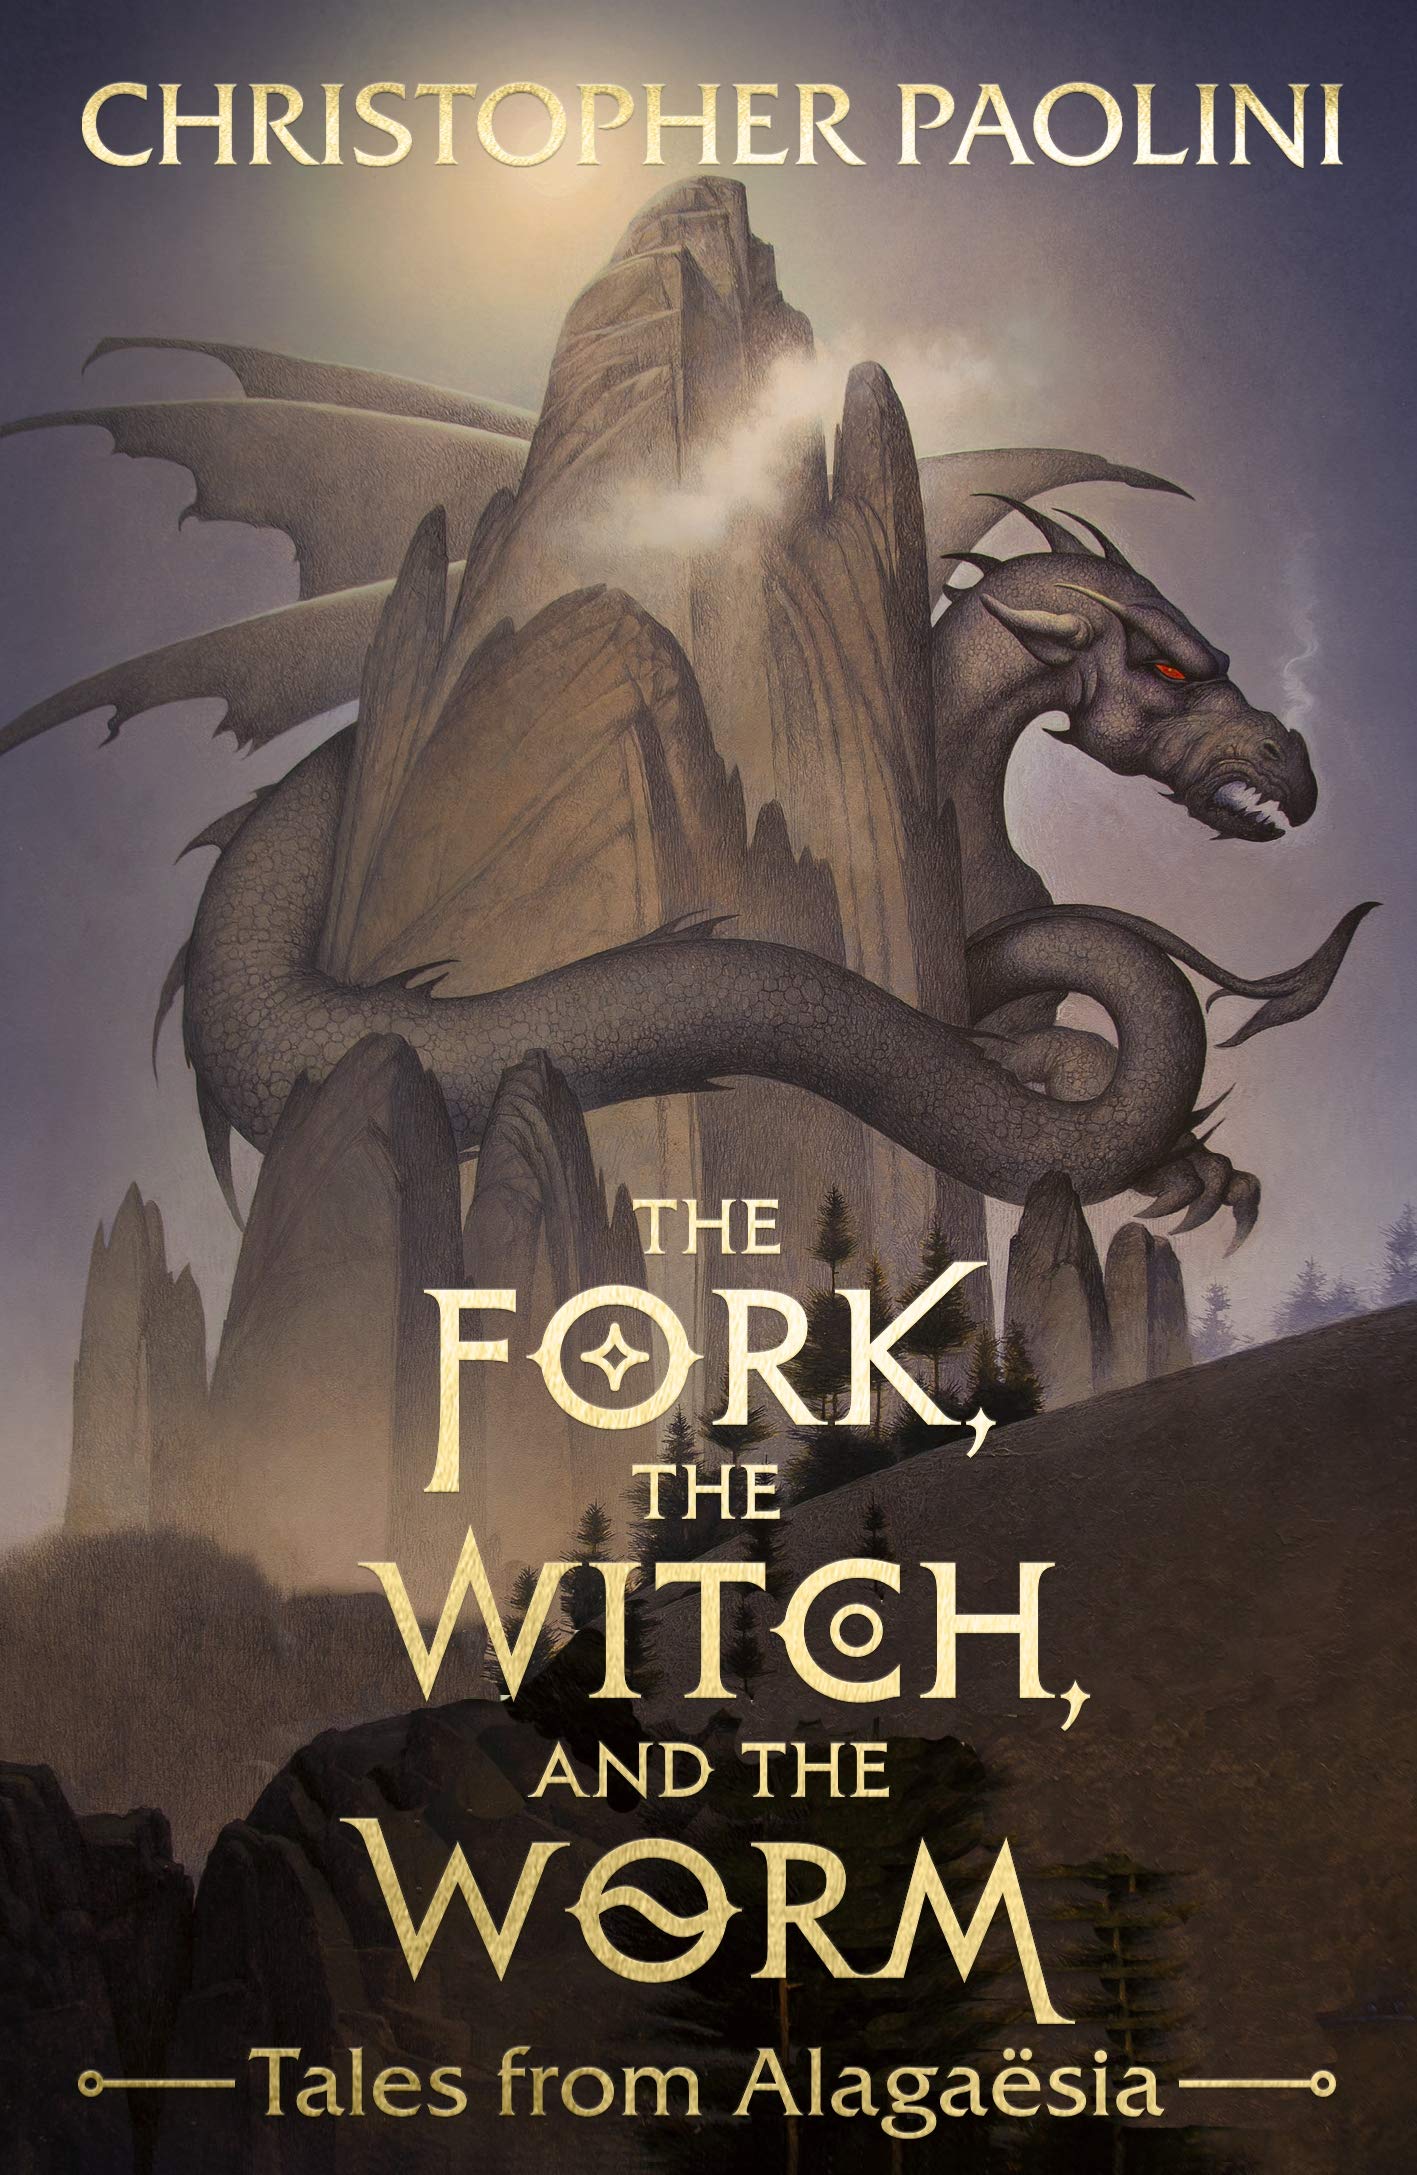 The Fork the Witch and the Worm | Youthopia